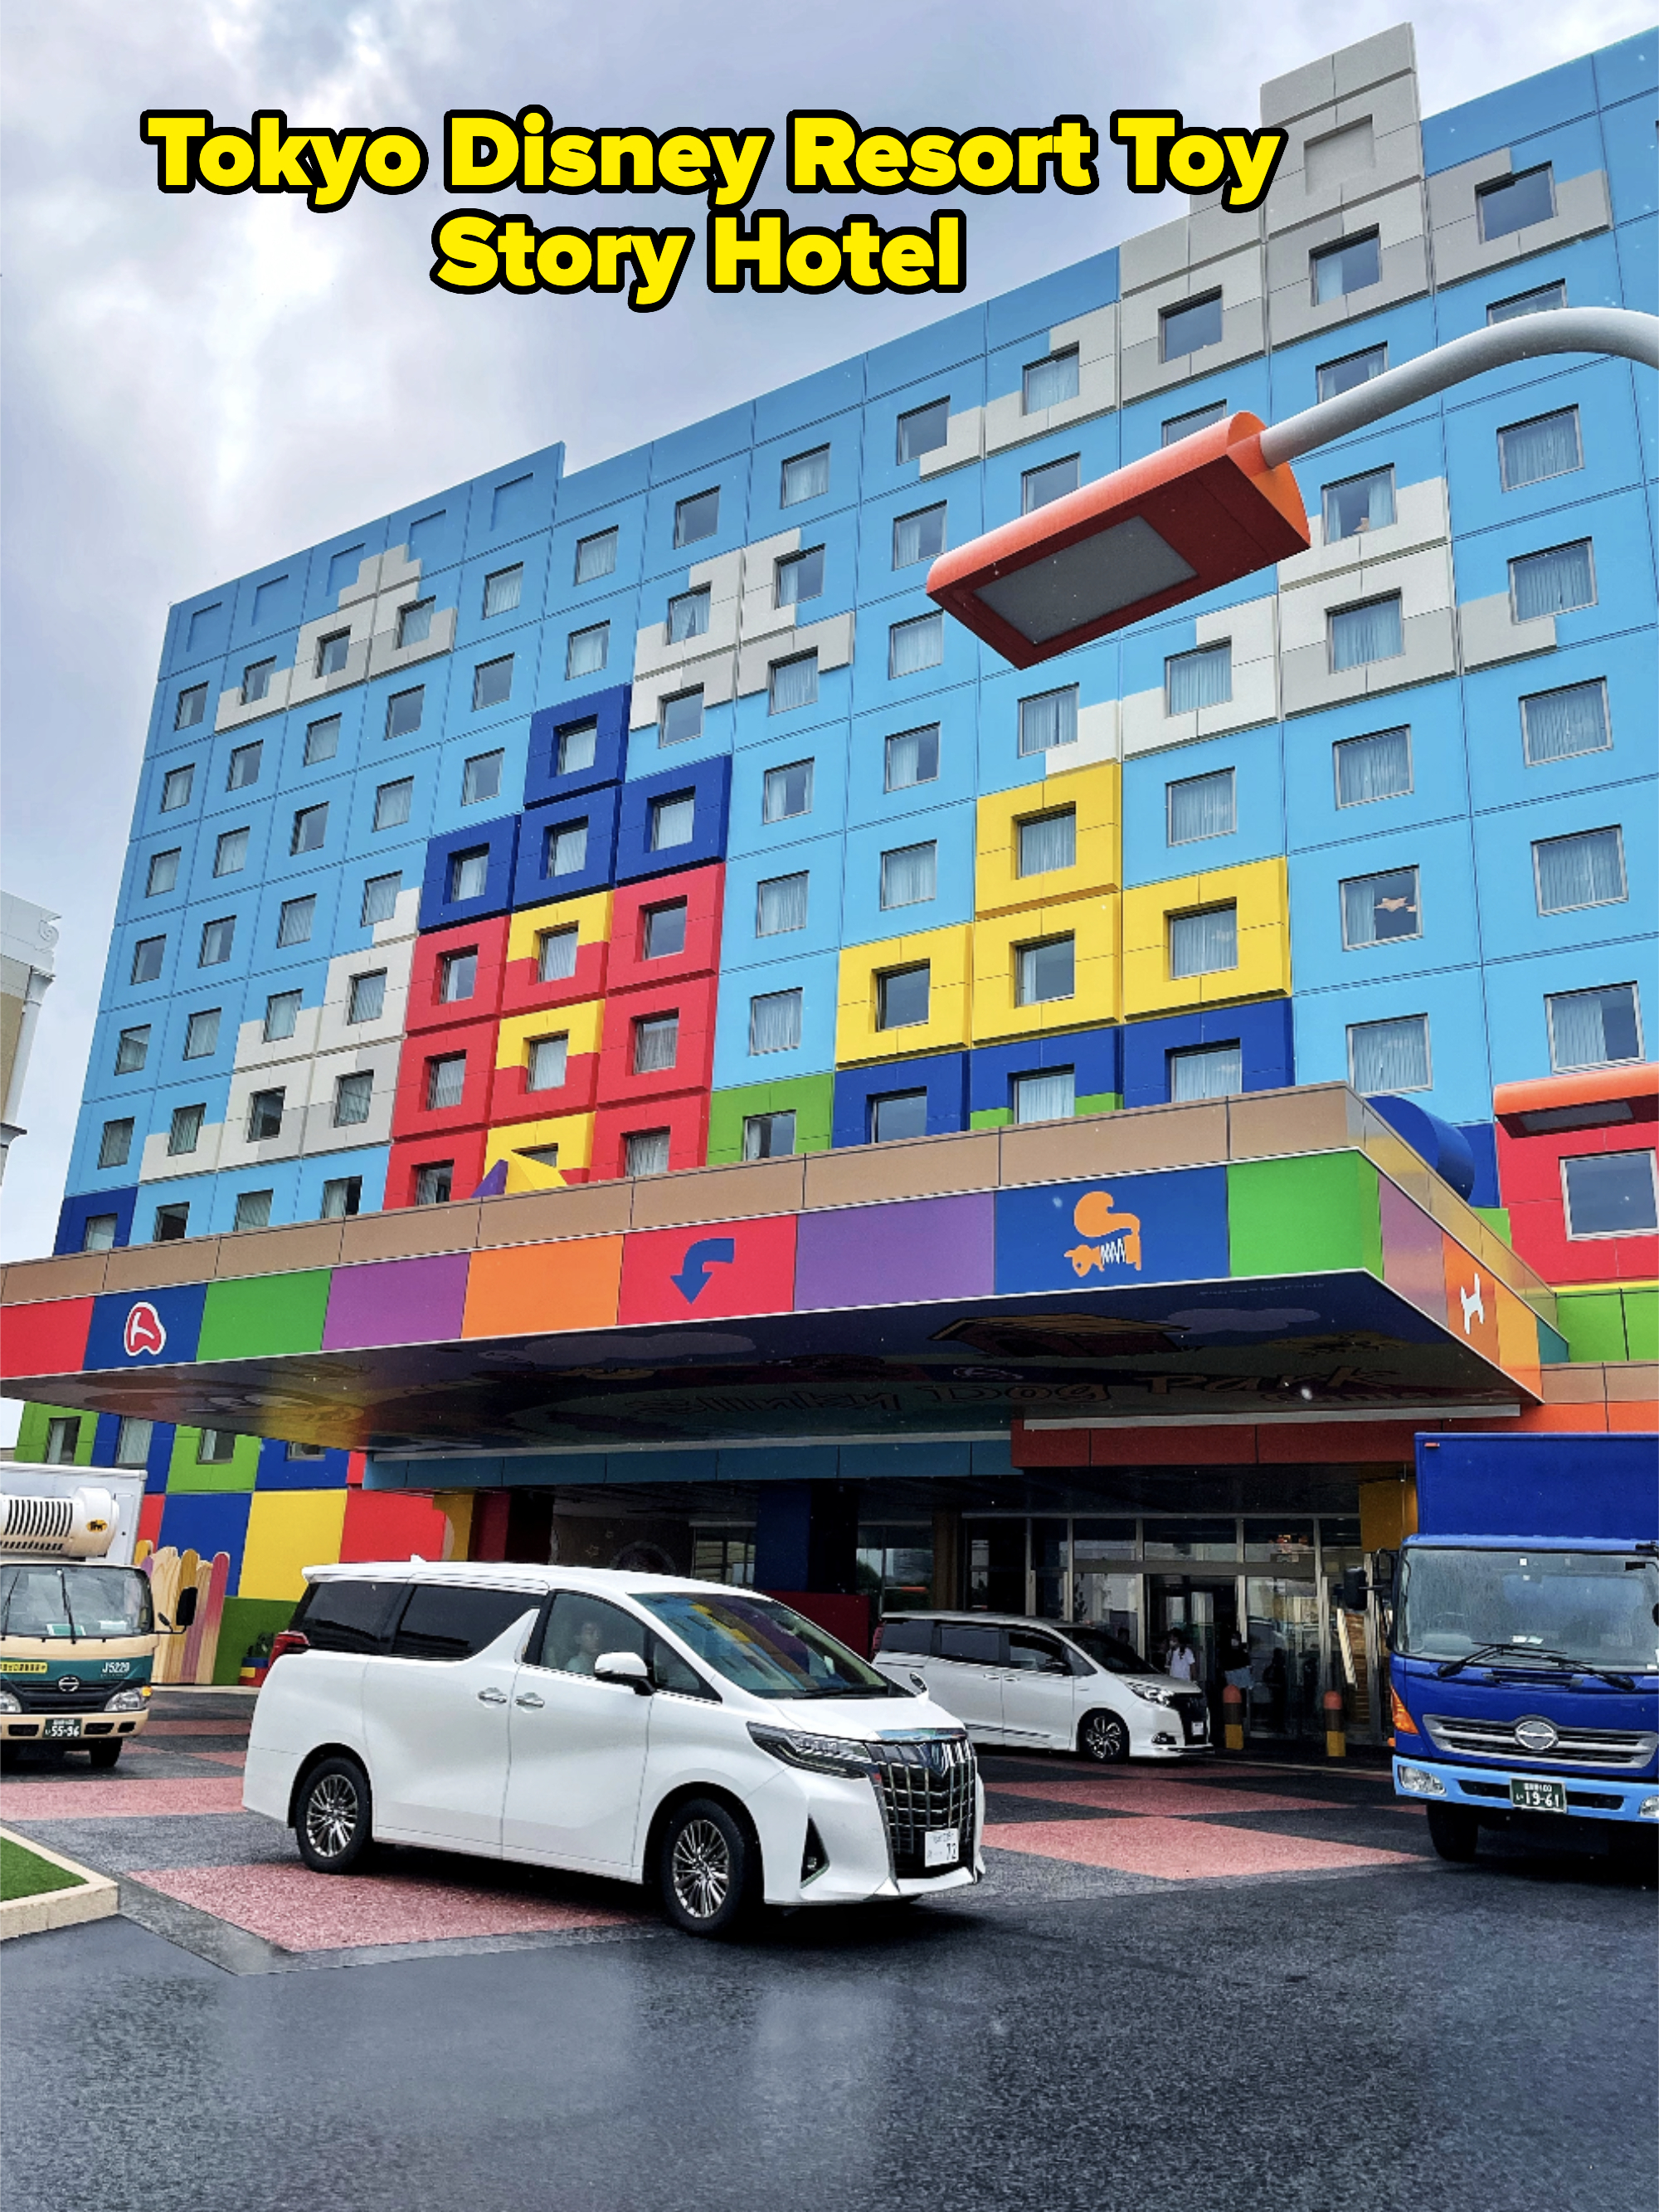 A colorful building with a playful facade and various vehicle logos. Two cars, one white and one blue, are in front of the building